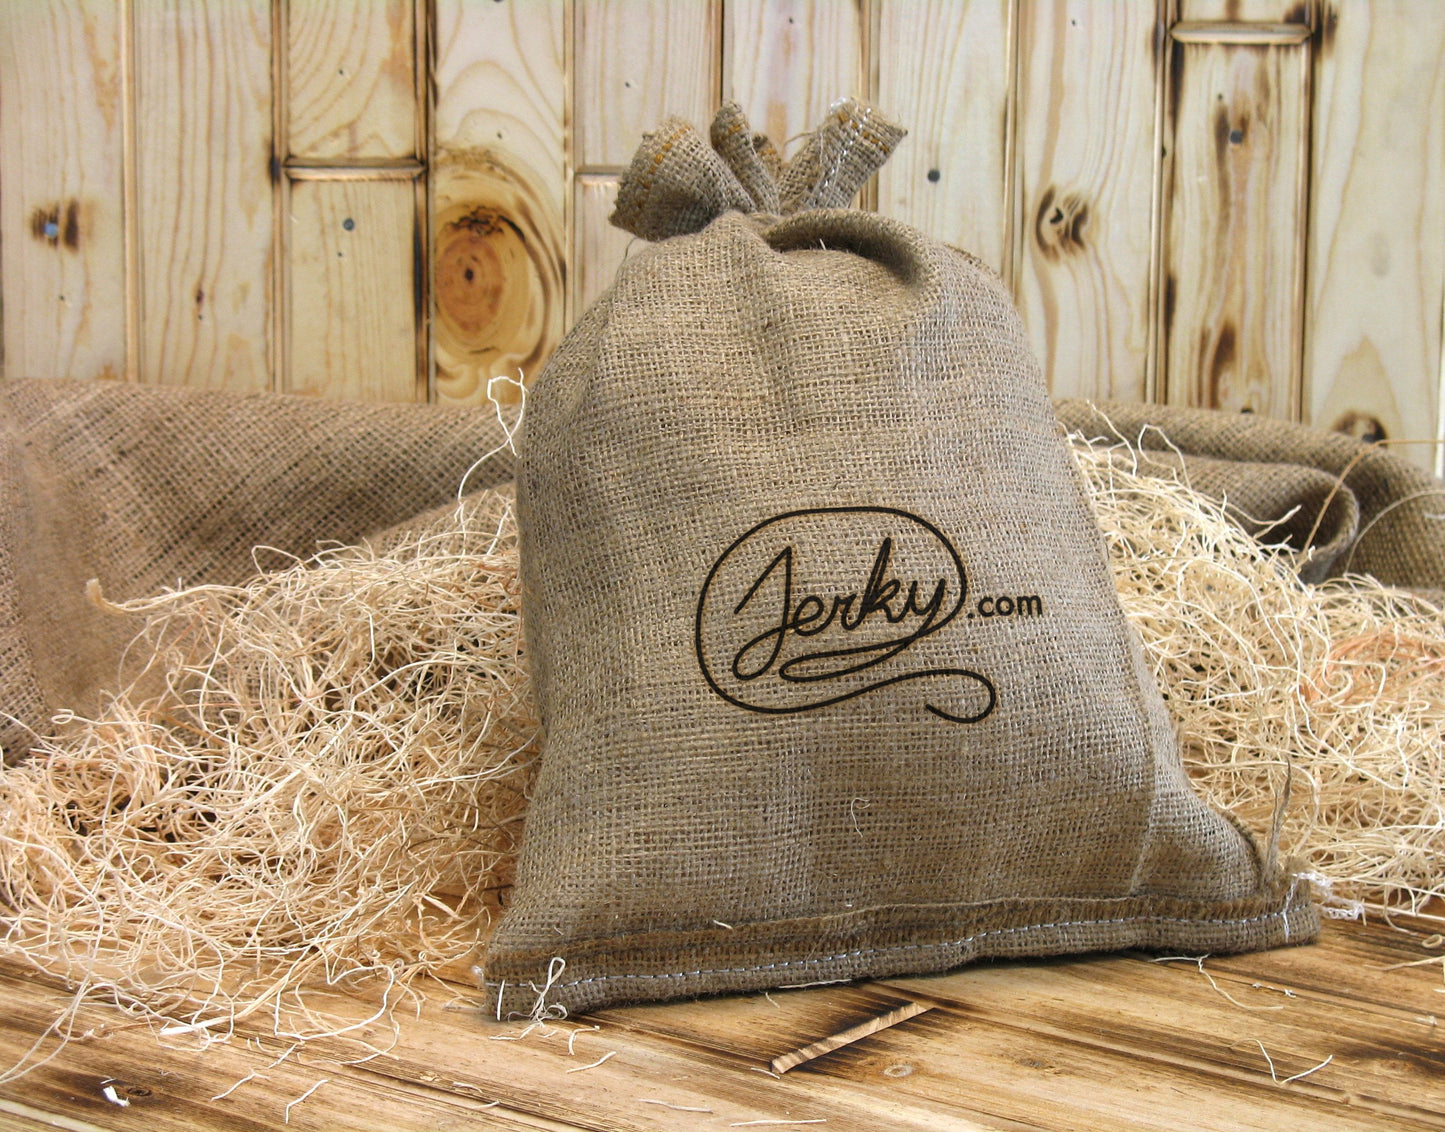 Build Your Own Jerky Gift Bag by Jerky.com